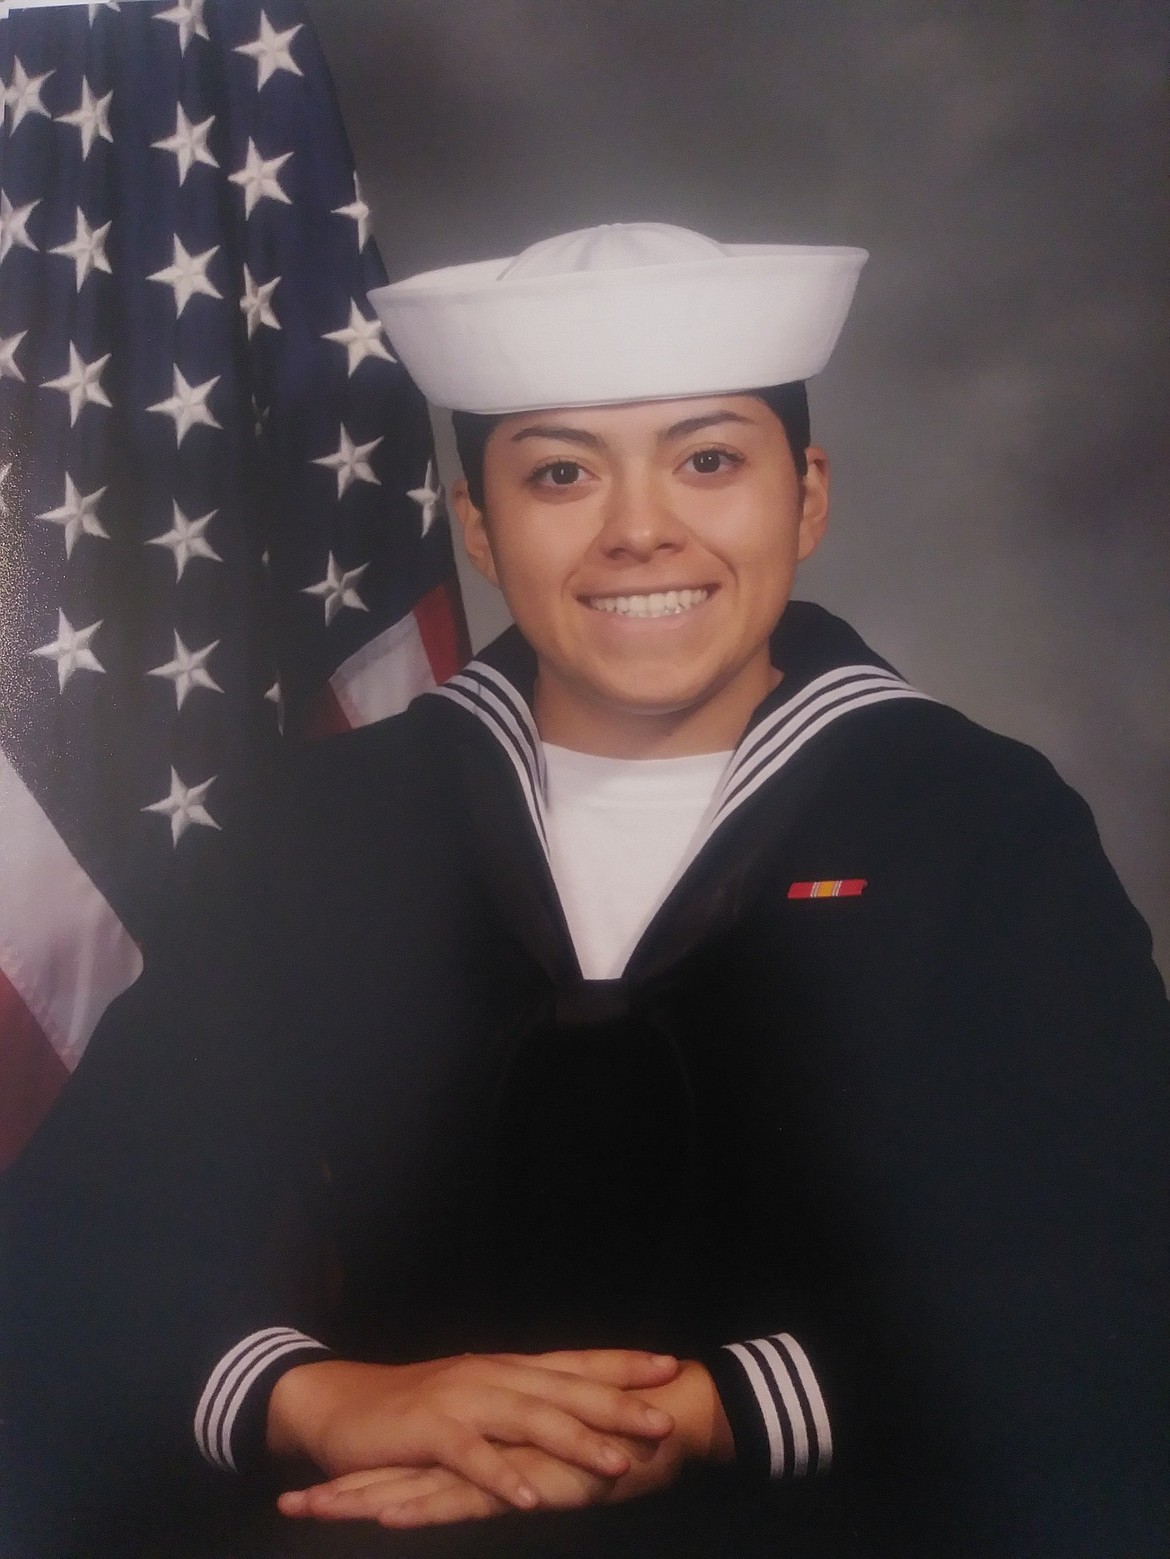 Julia Gutierrez-Carsten made the decision to join the U.S. Navy to follow family members who had served in the armed forces as well.